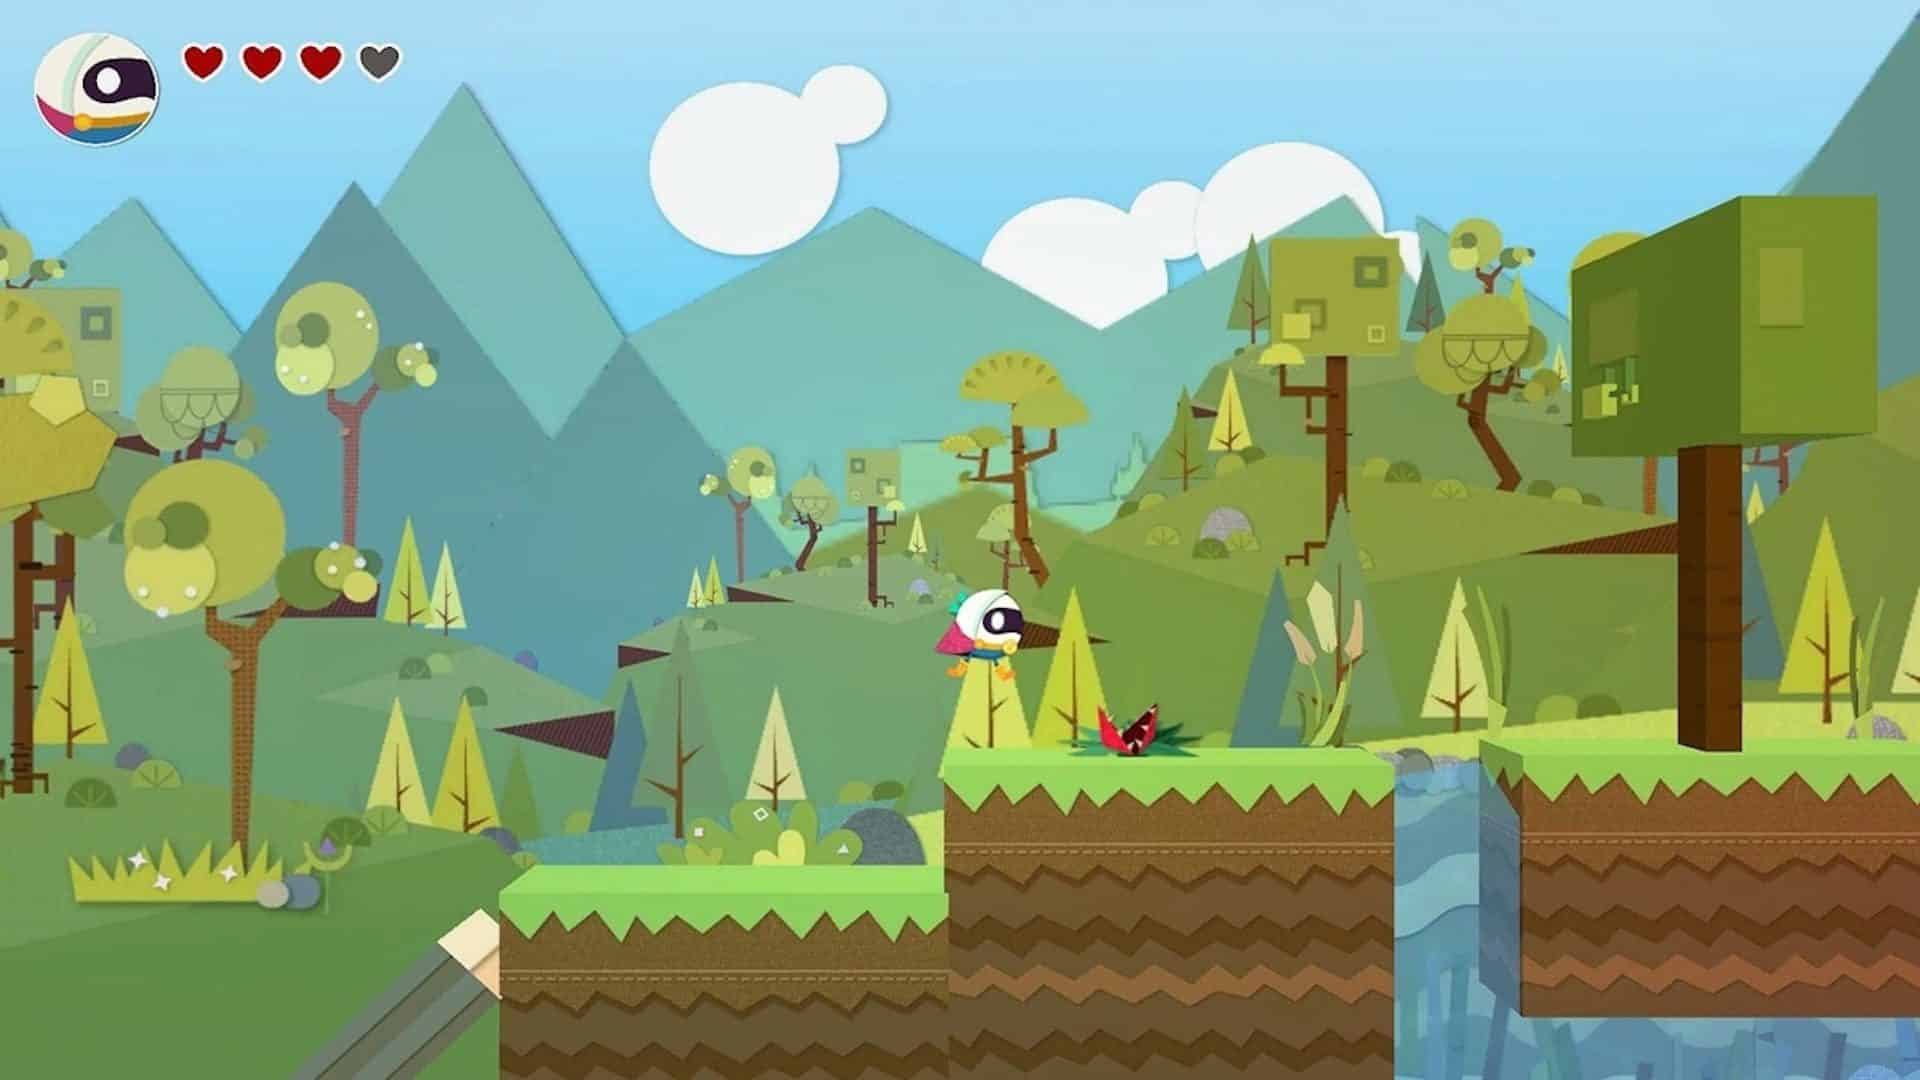 Flat Kingdom Paper's Cut Edition game scene in forest with river